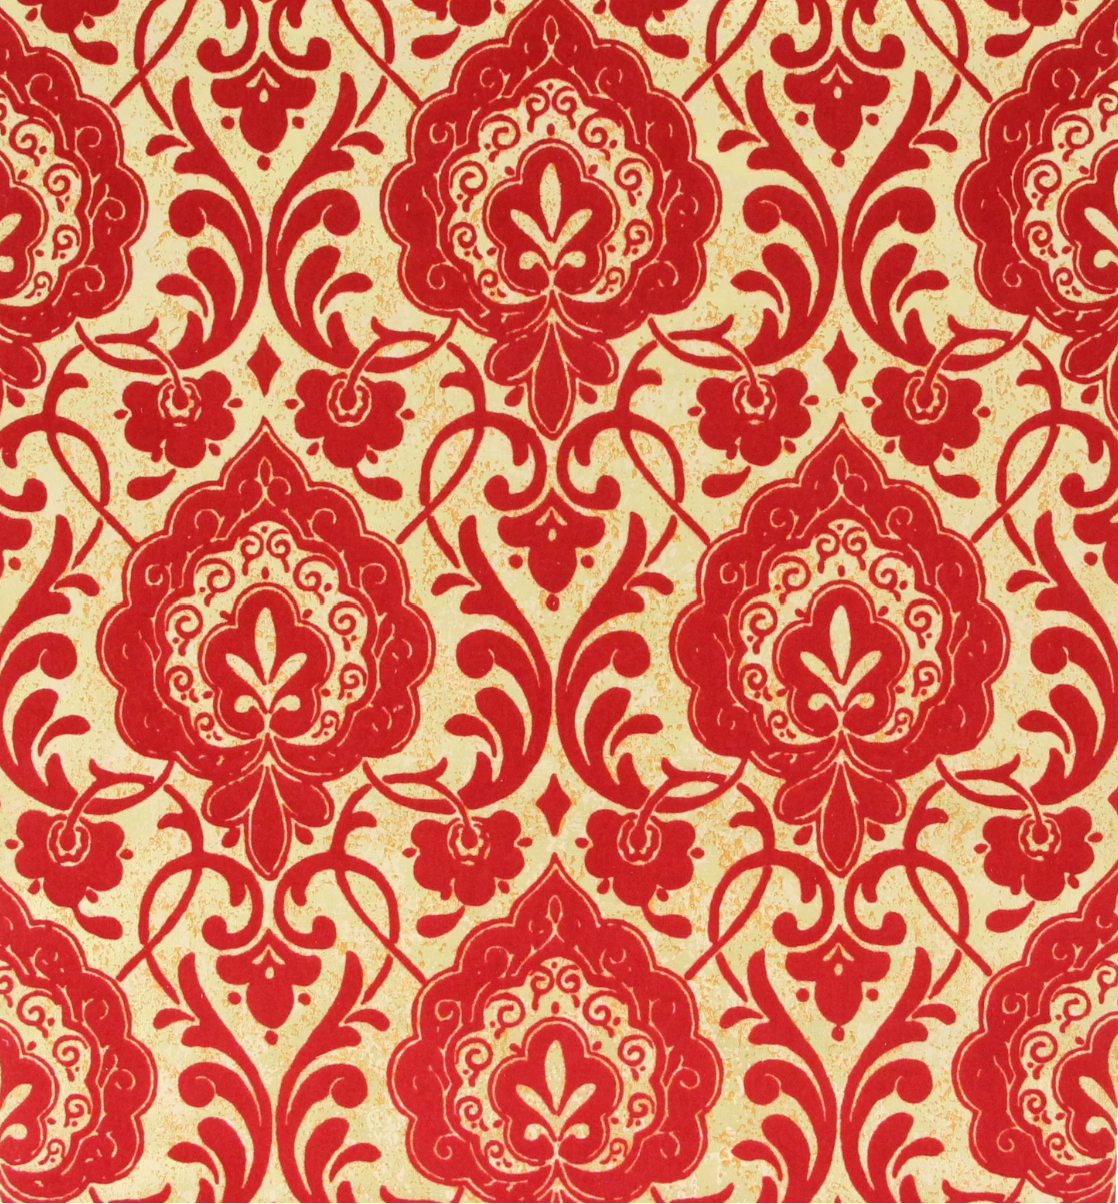 A swatch of wallpaper featuring crimson floral and leaf pattern on a gold background